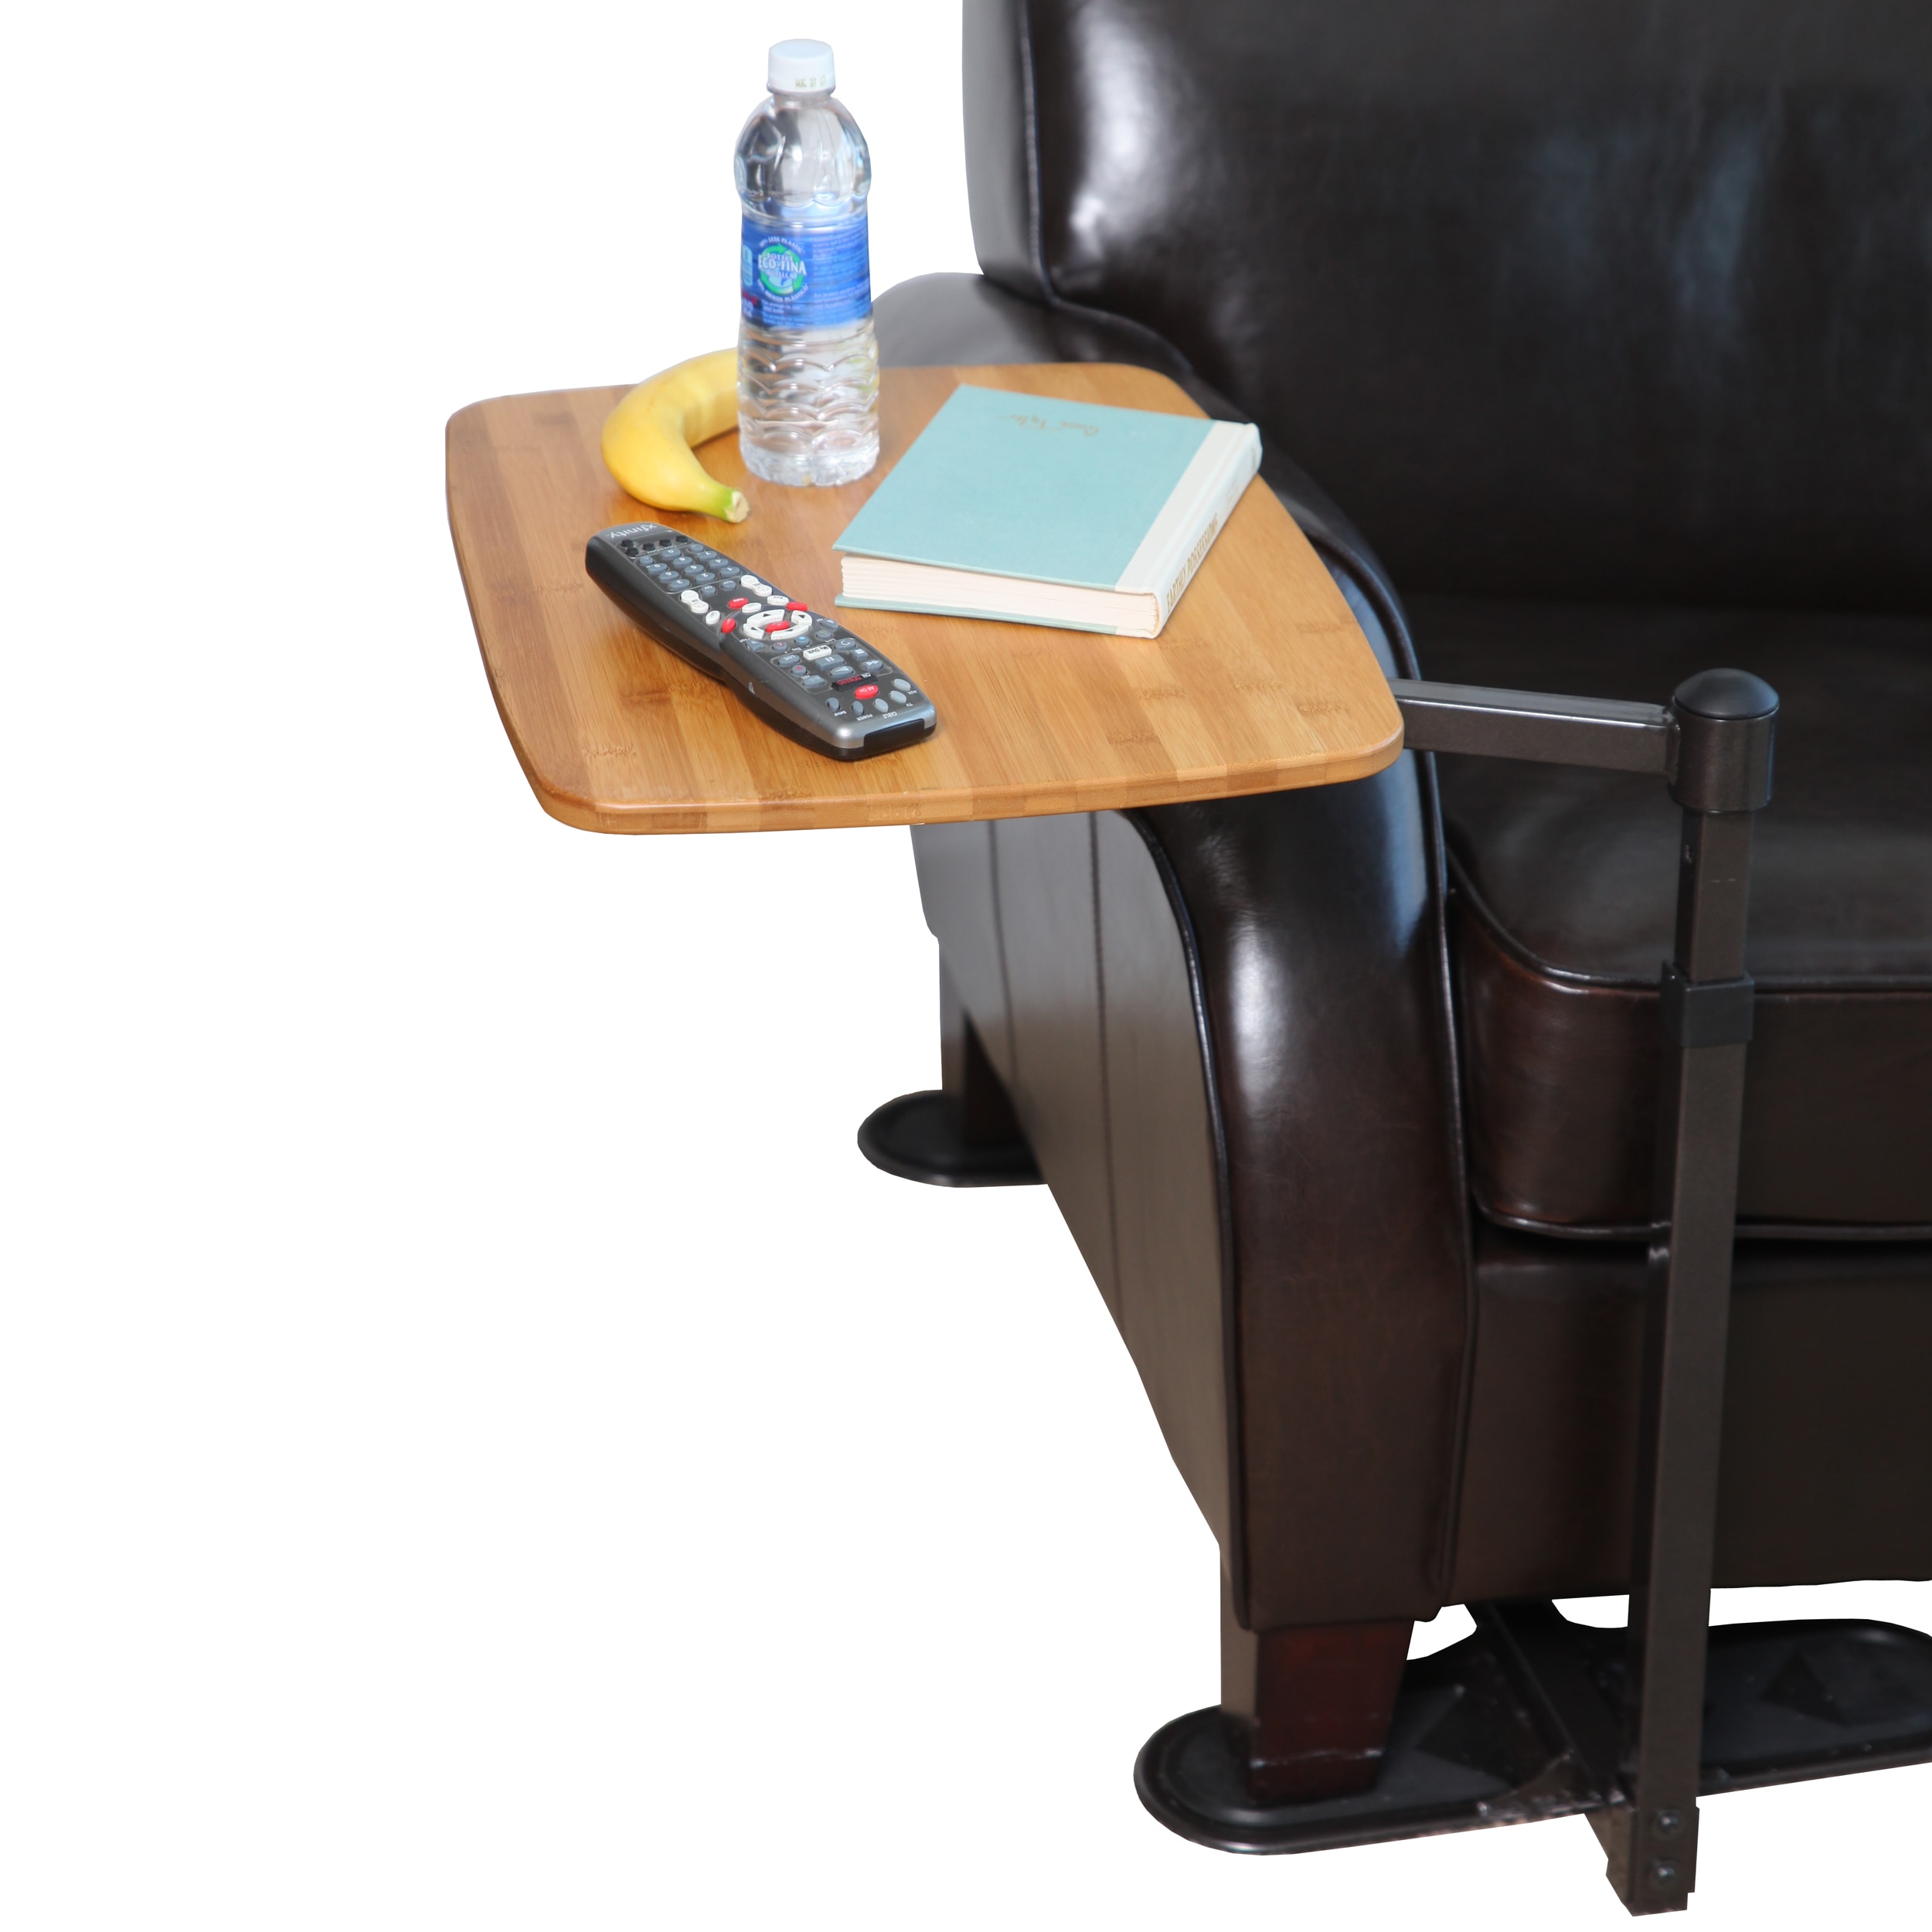 Able Life Universal Swivel TV Tray Table, Galaxy Brown